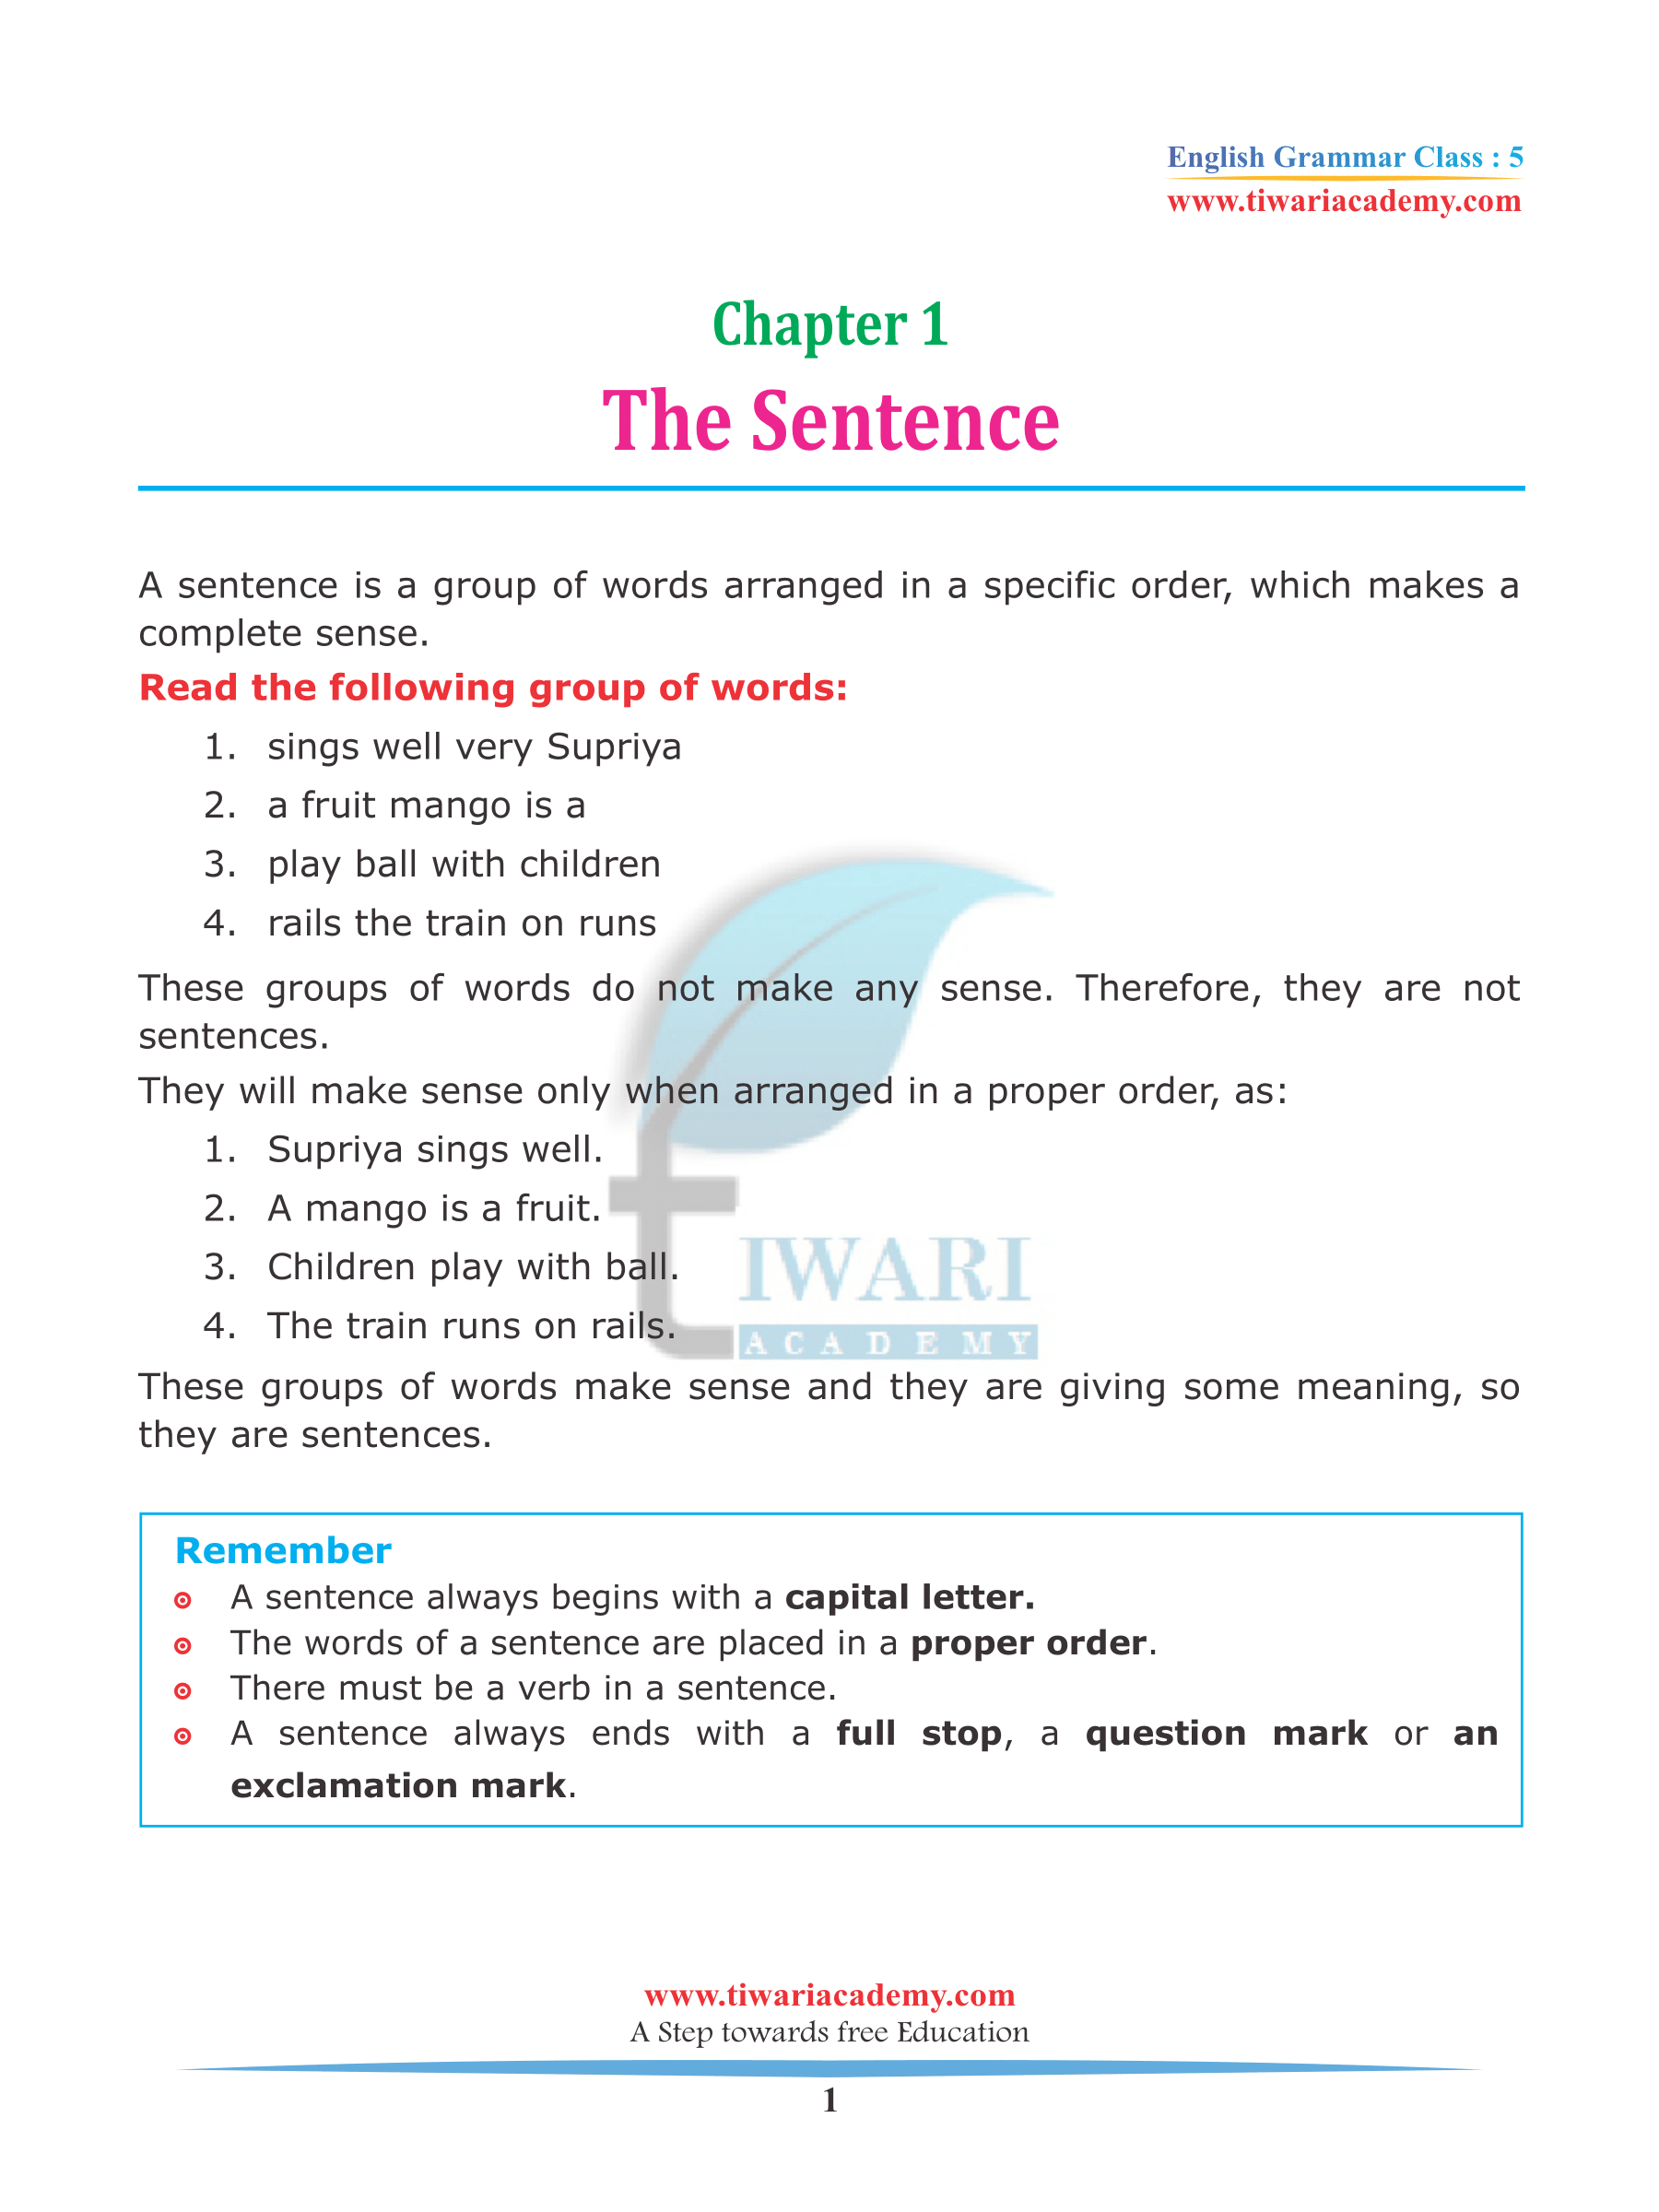 class-5-english-grammar-chapter-1-the-sentence-for-2022-2023-free